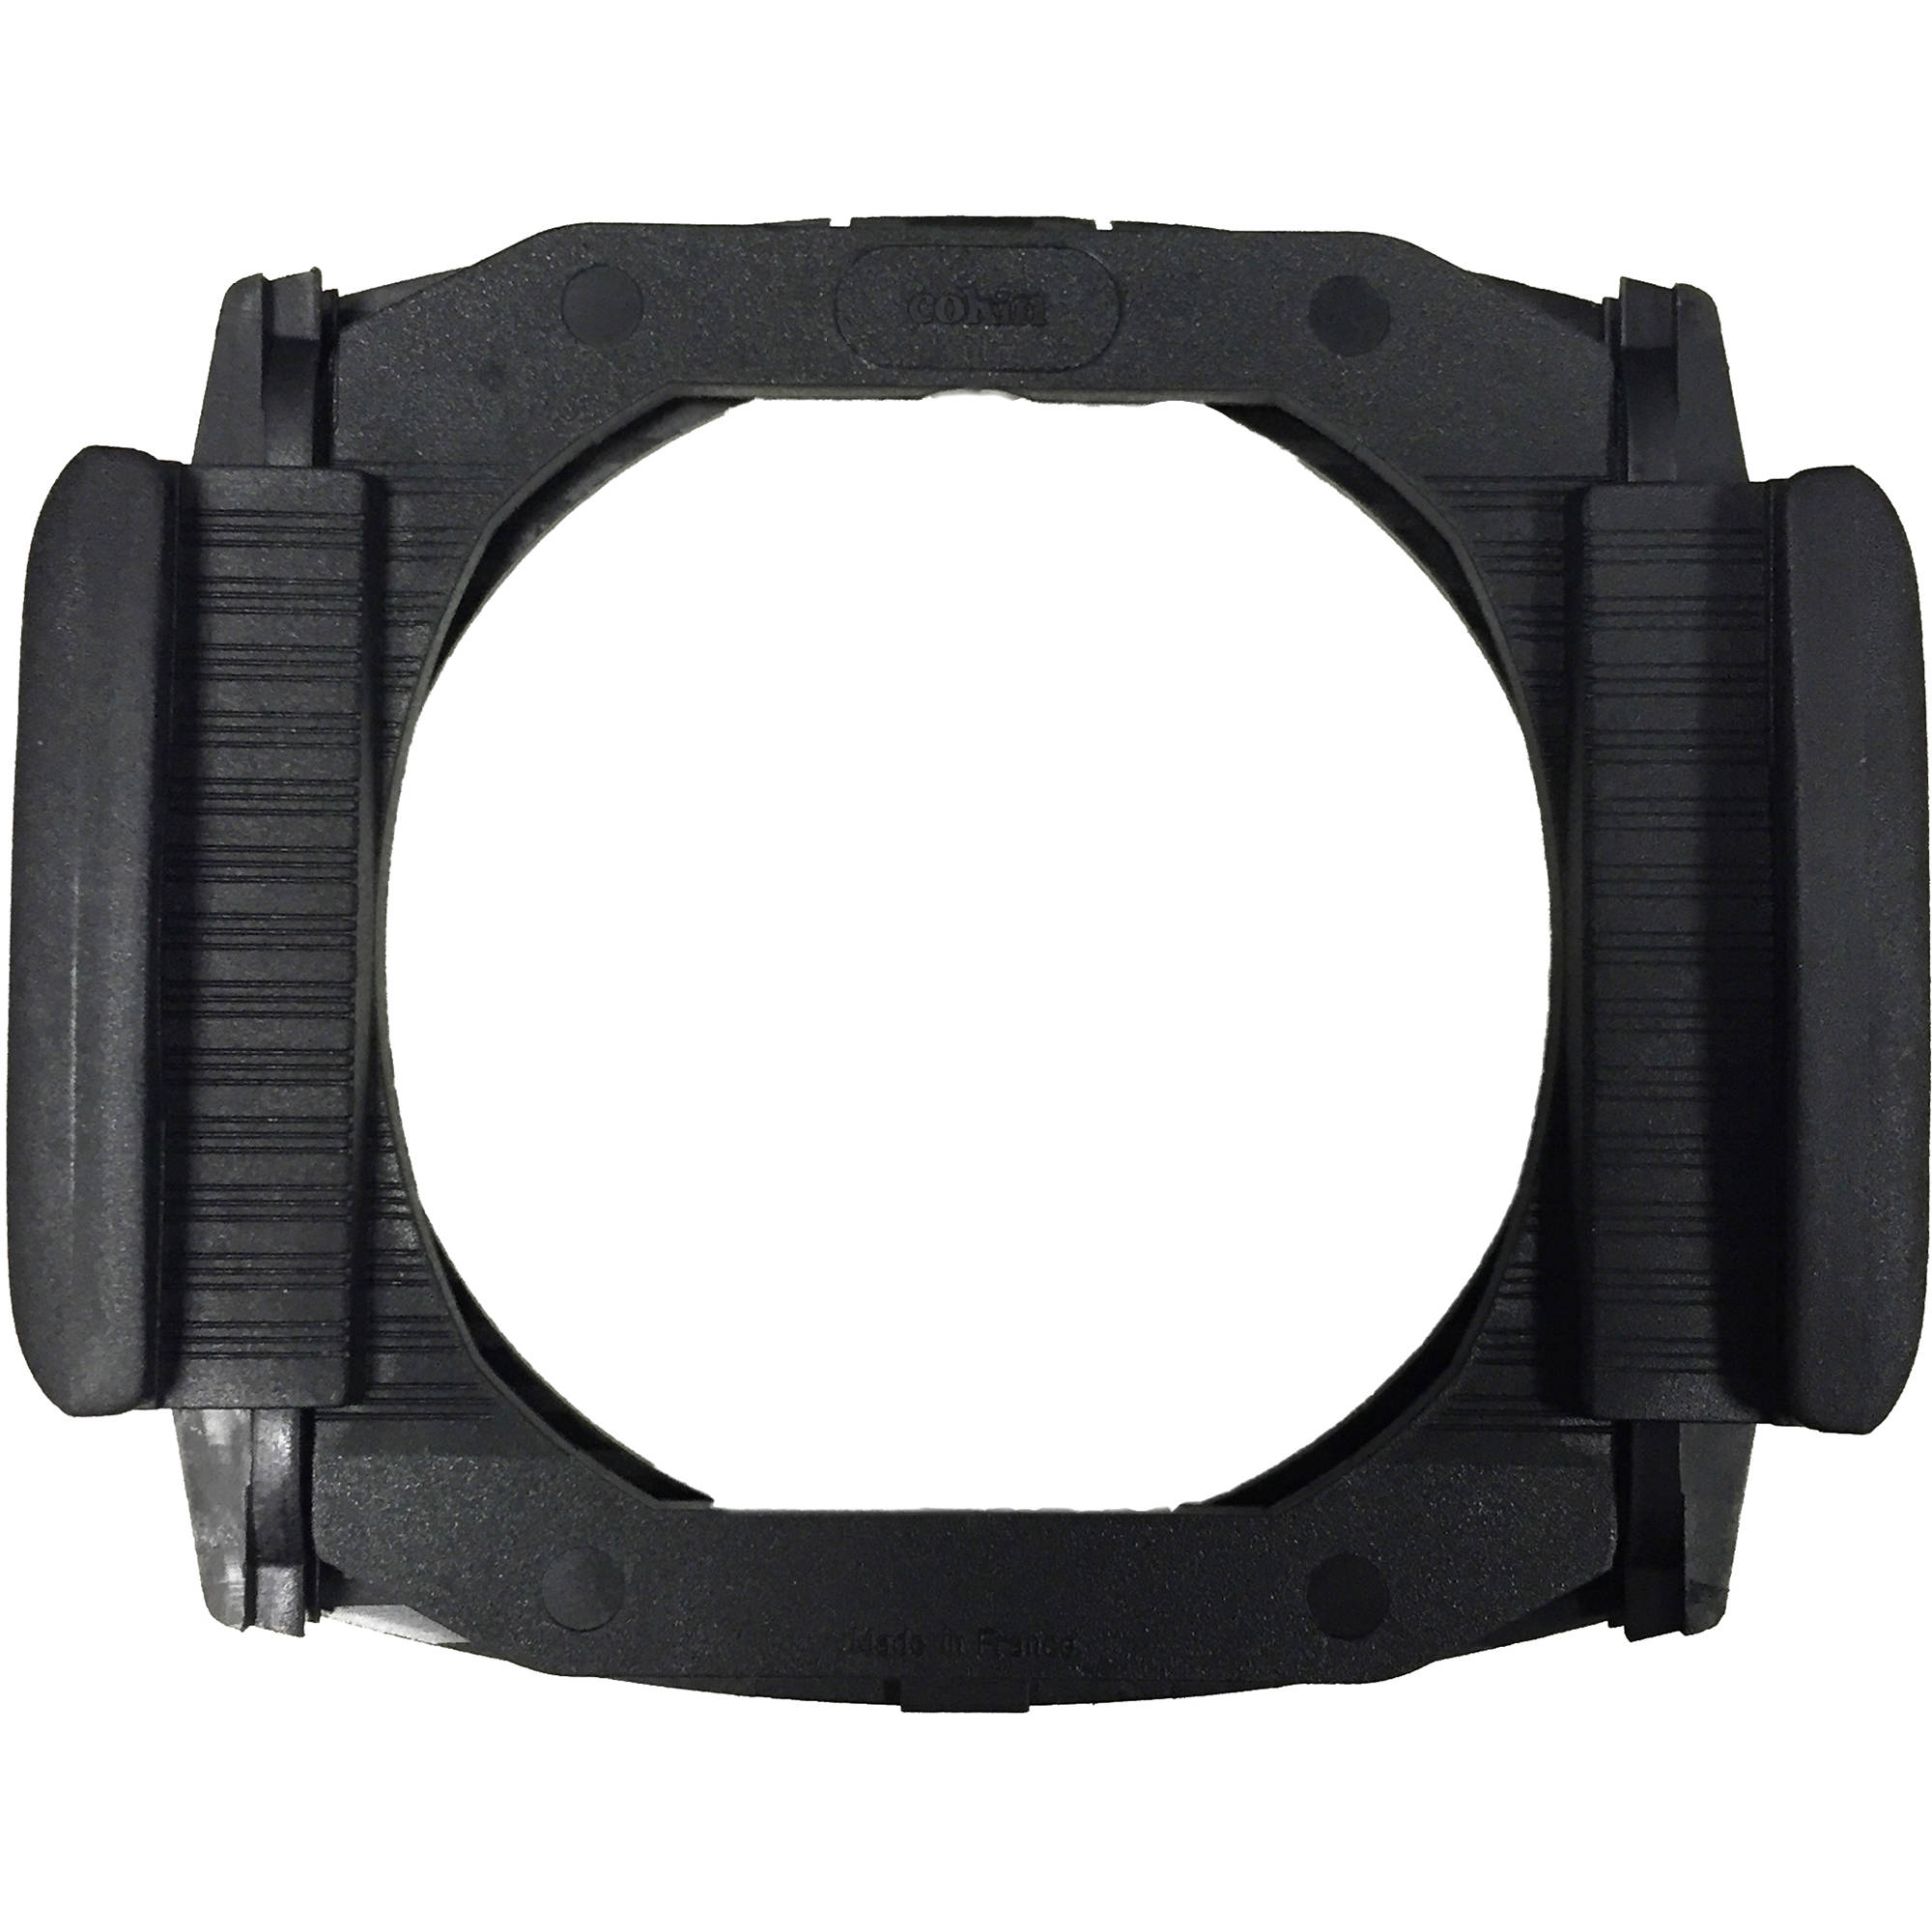 Cokin P Series Wide Angle Filter Holder And Step Up Bzp 400a B H This holder holds only one filter but will permit use of lenses wider than 20mm in the 35mm format. b h